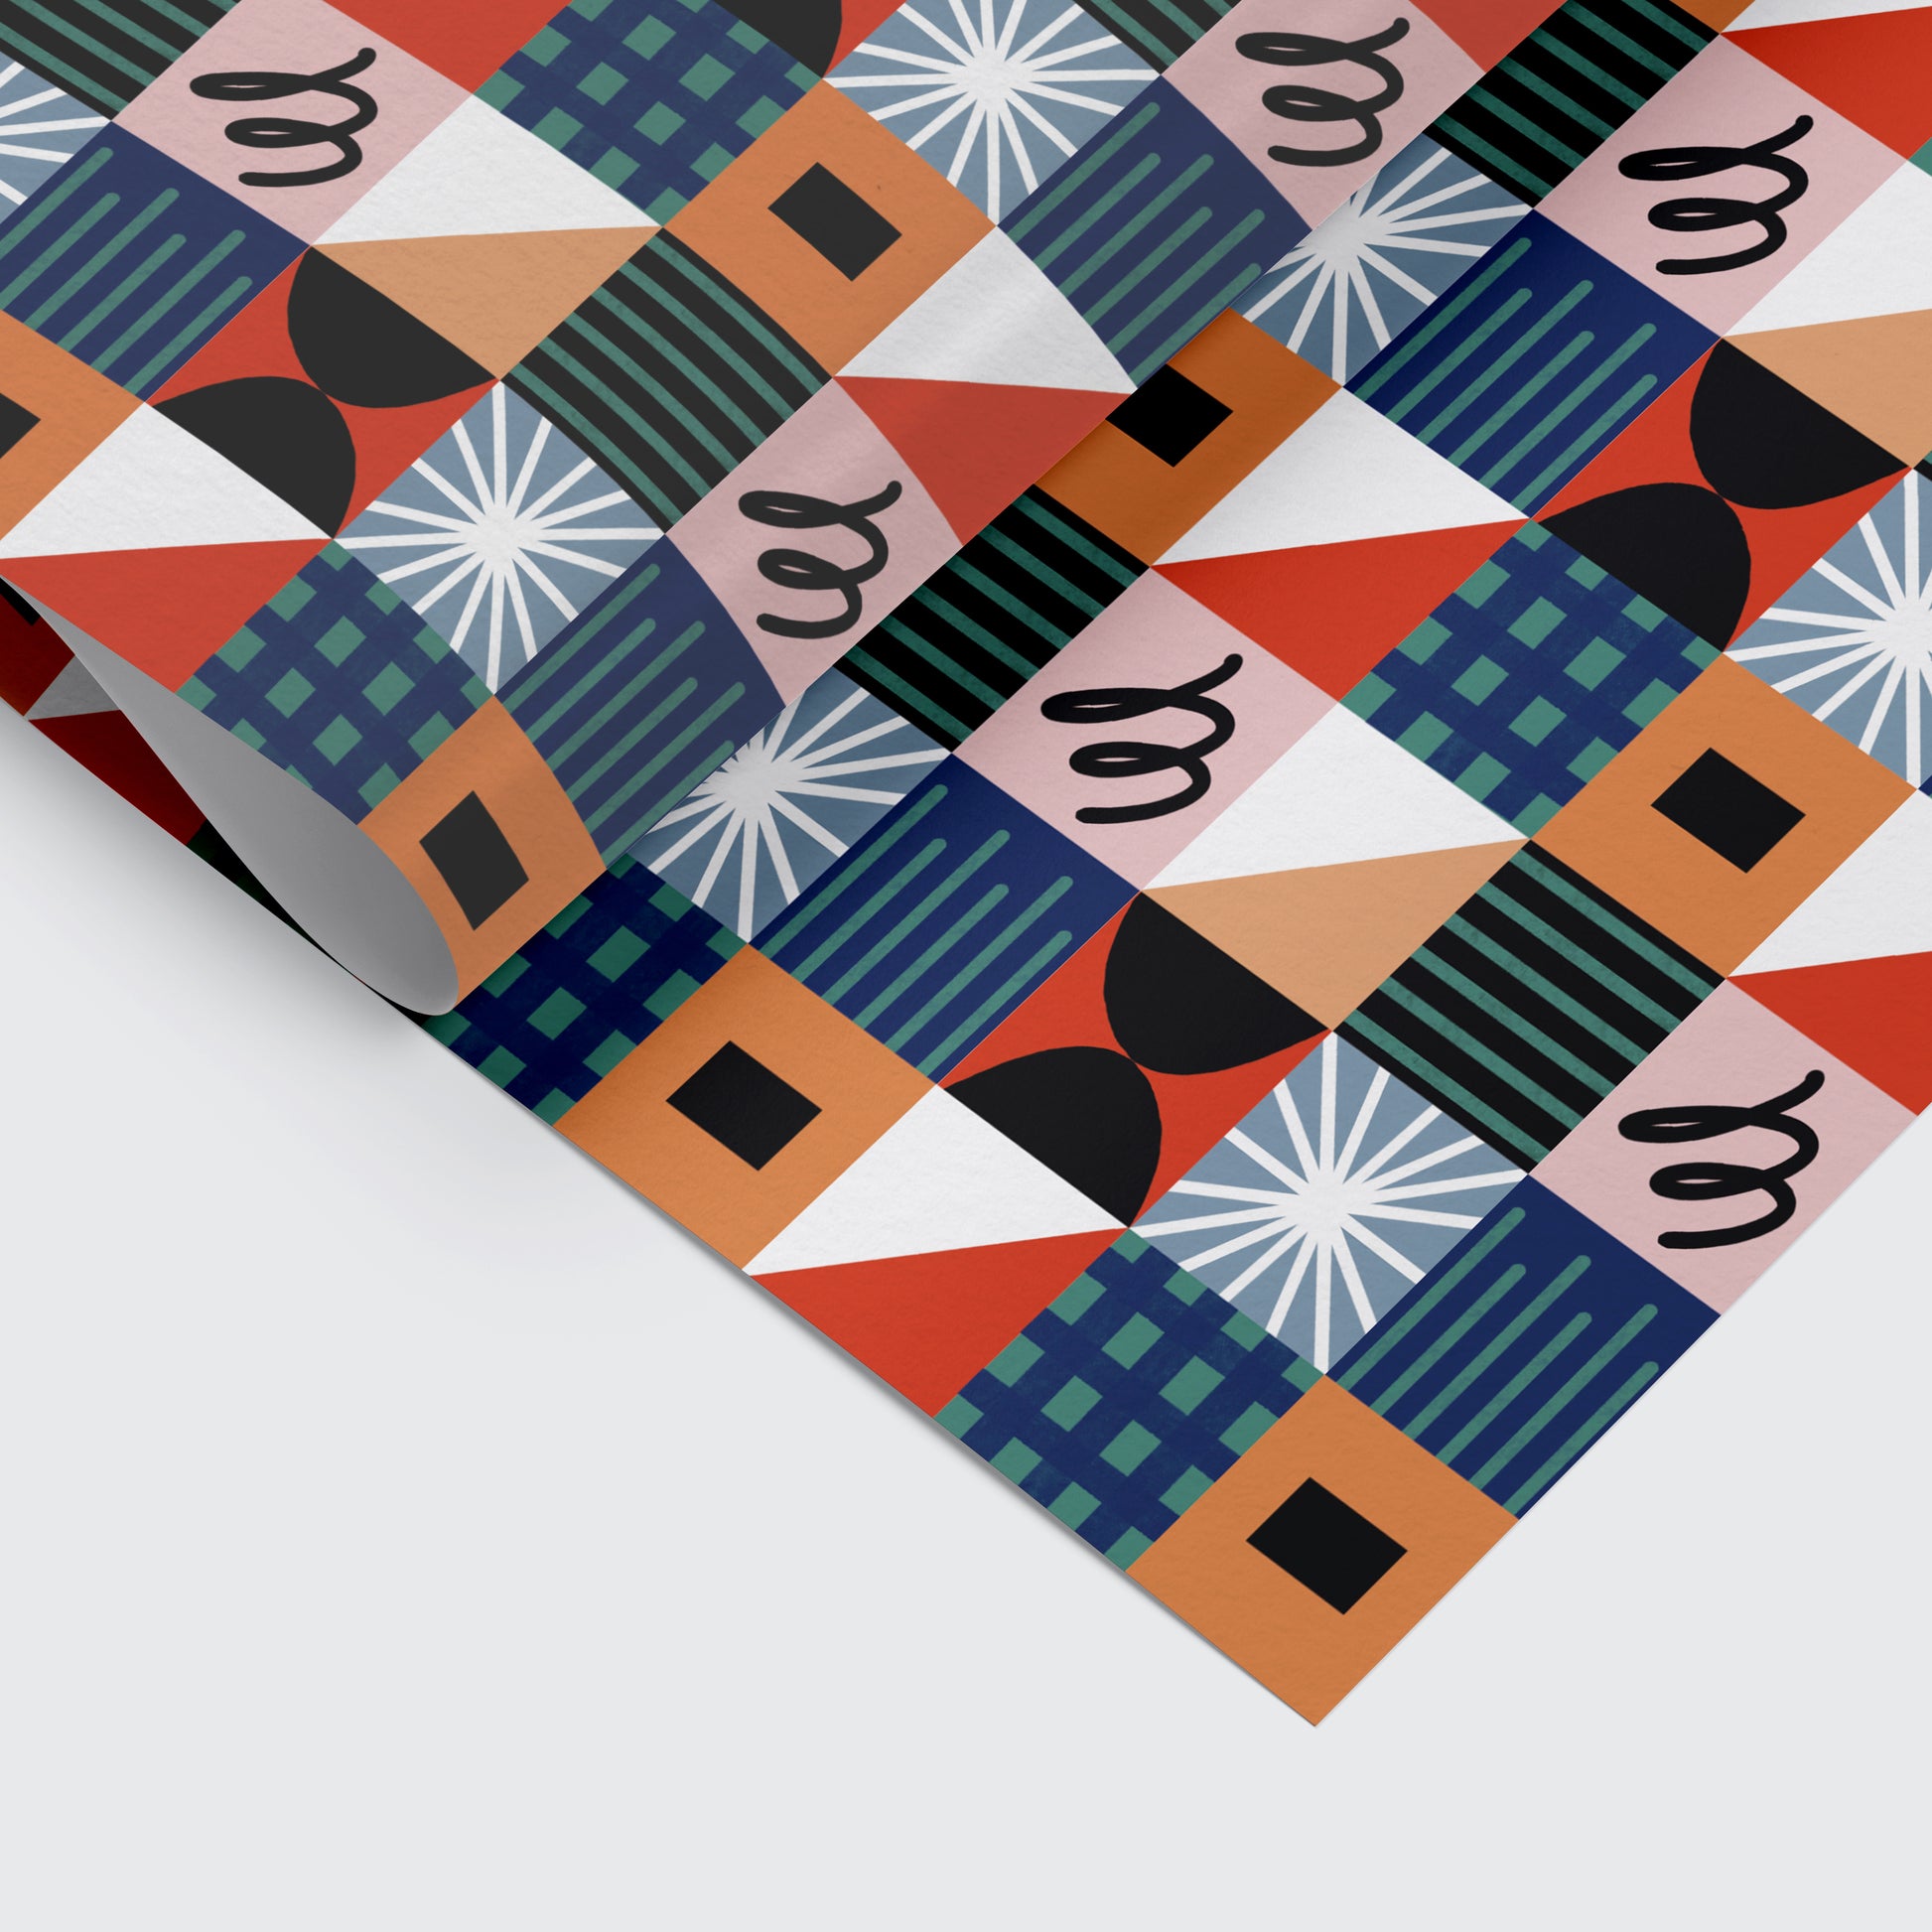 wrapping paper with geometric patterns on it